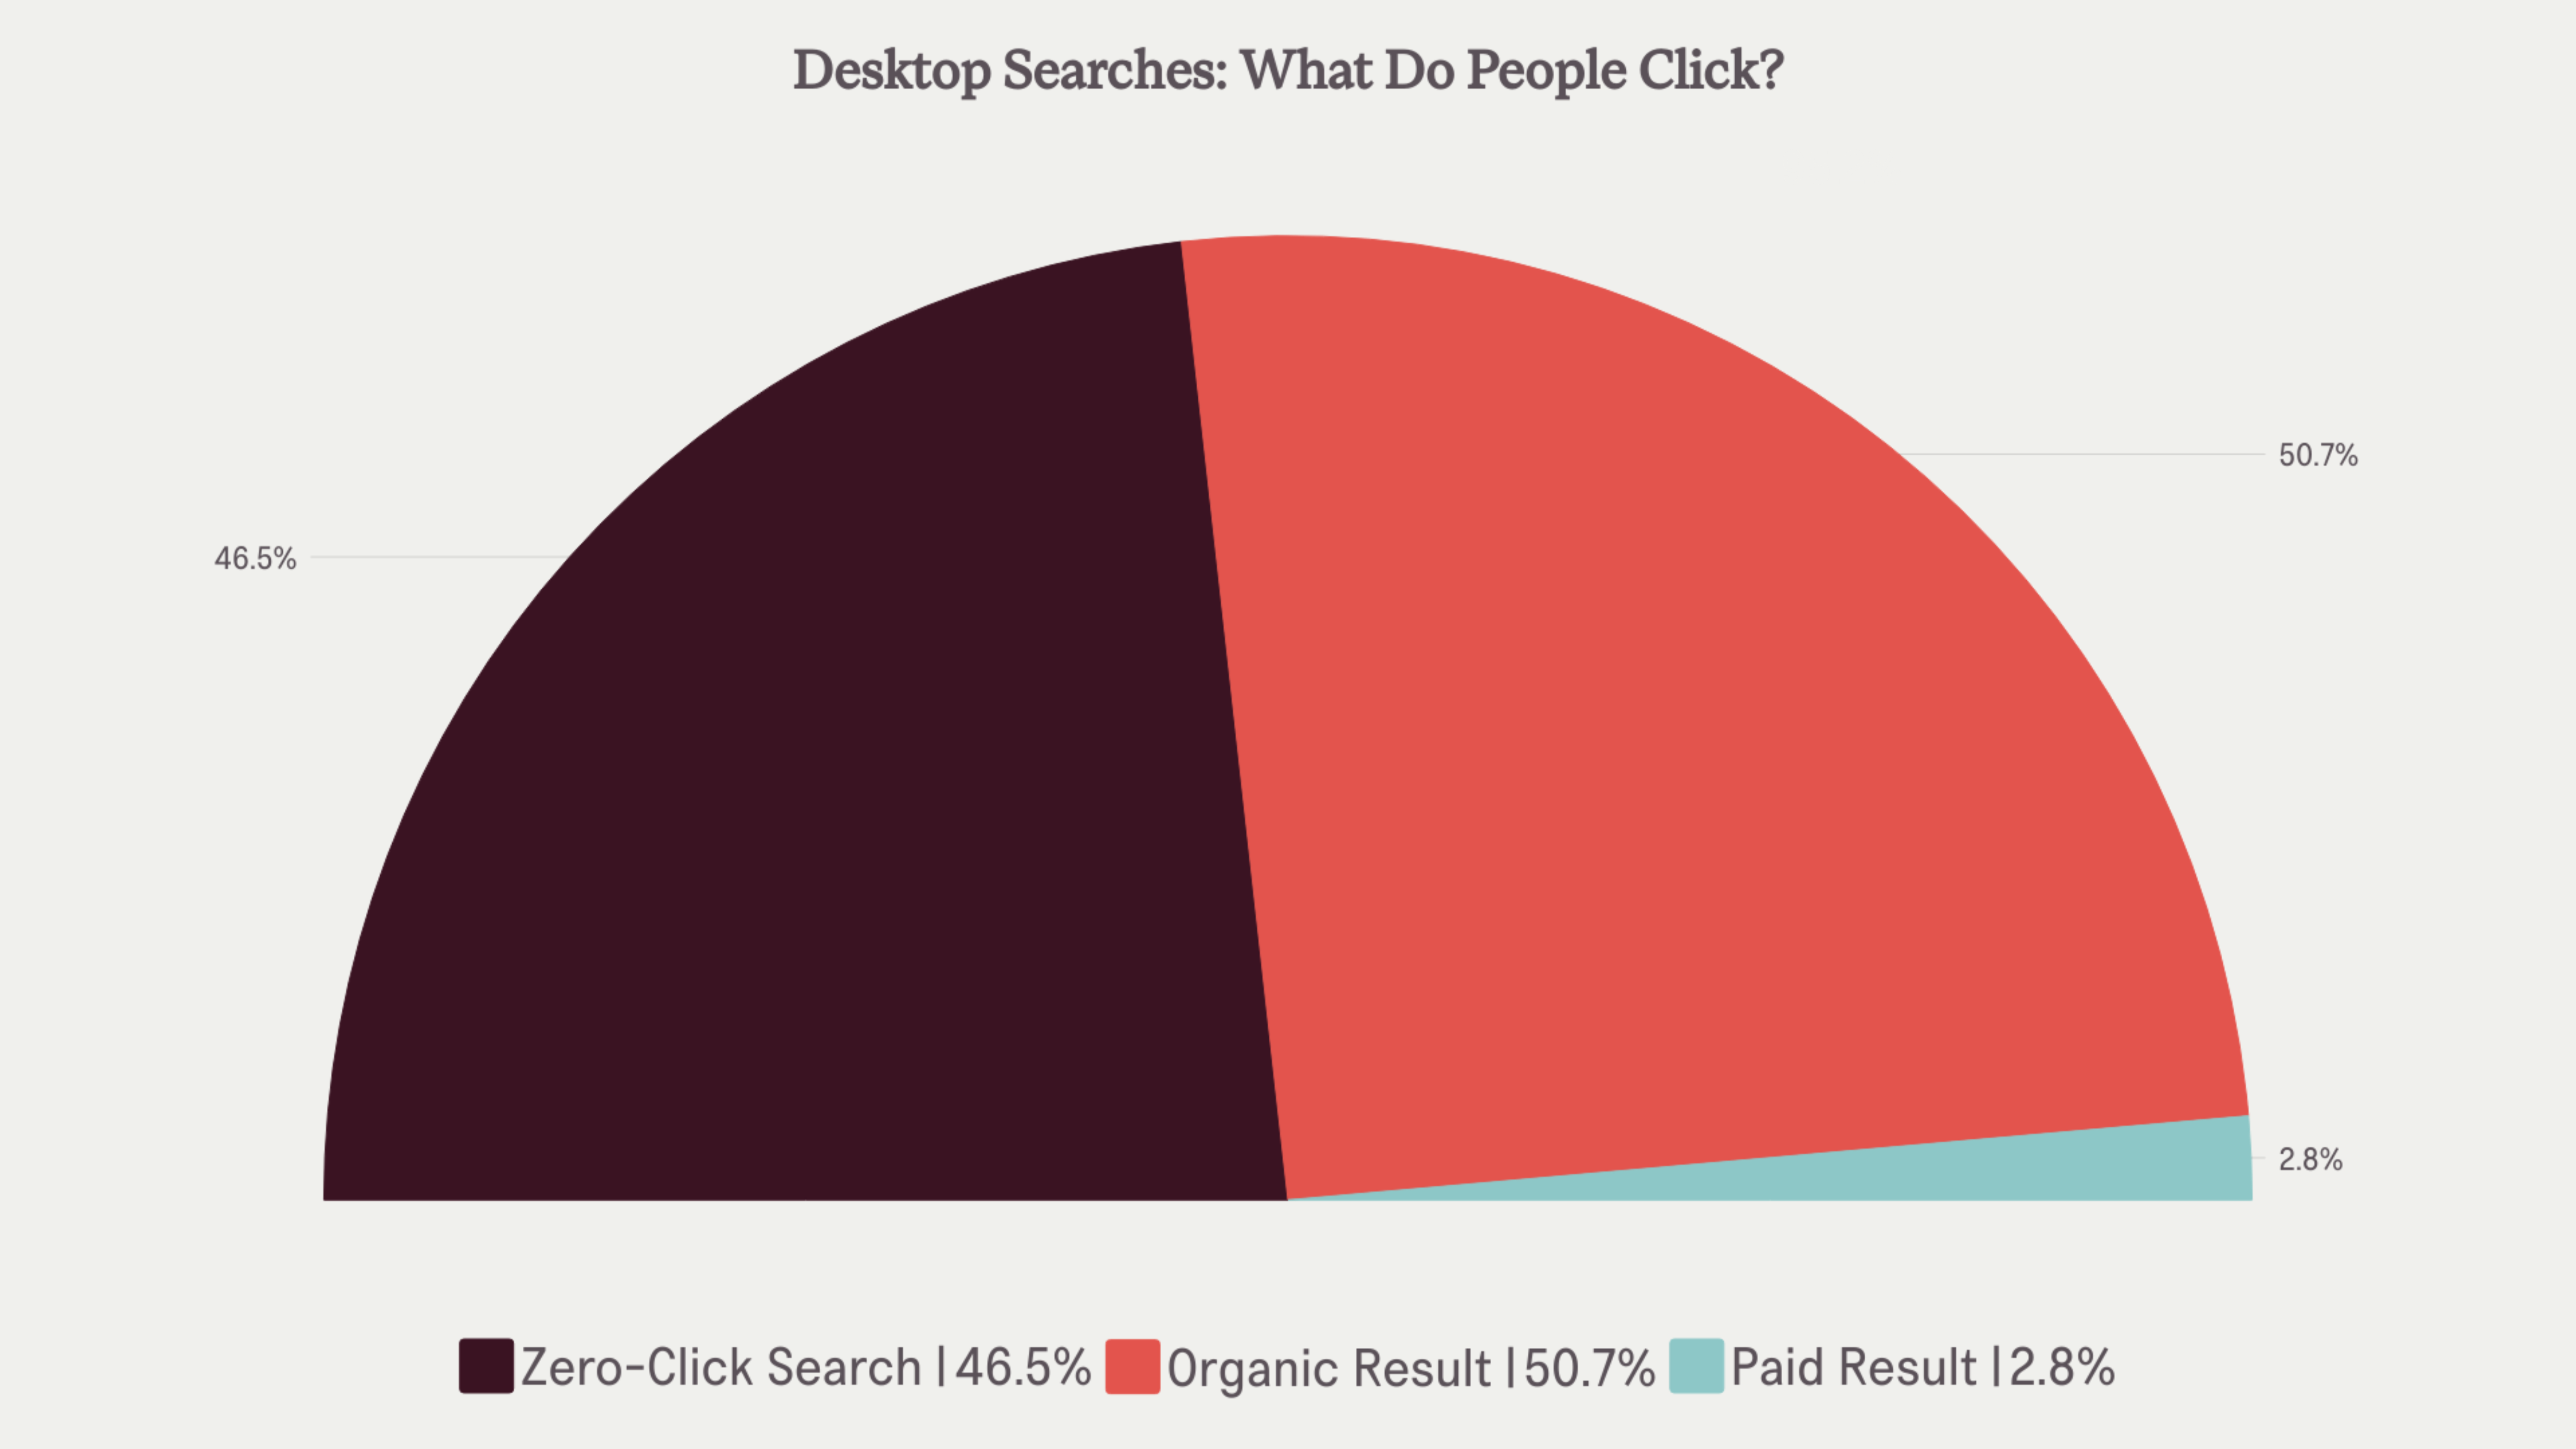 seo stats pie chart showing what people click during desktop searches